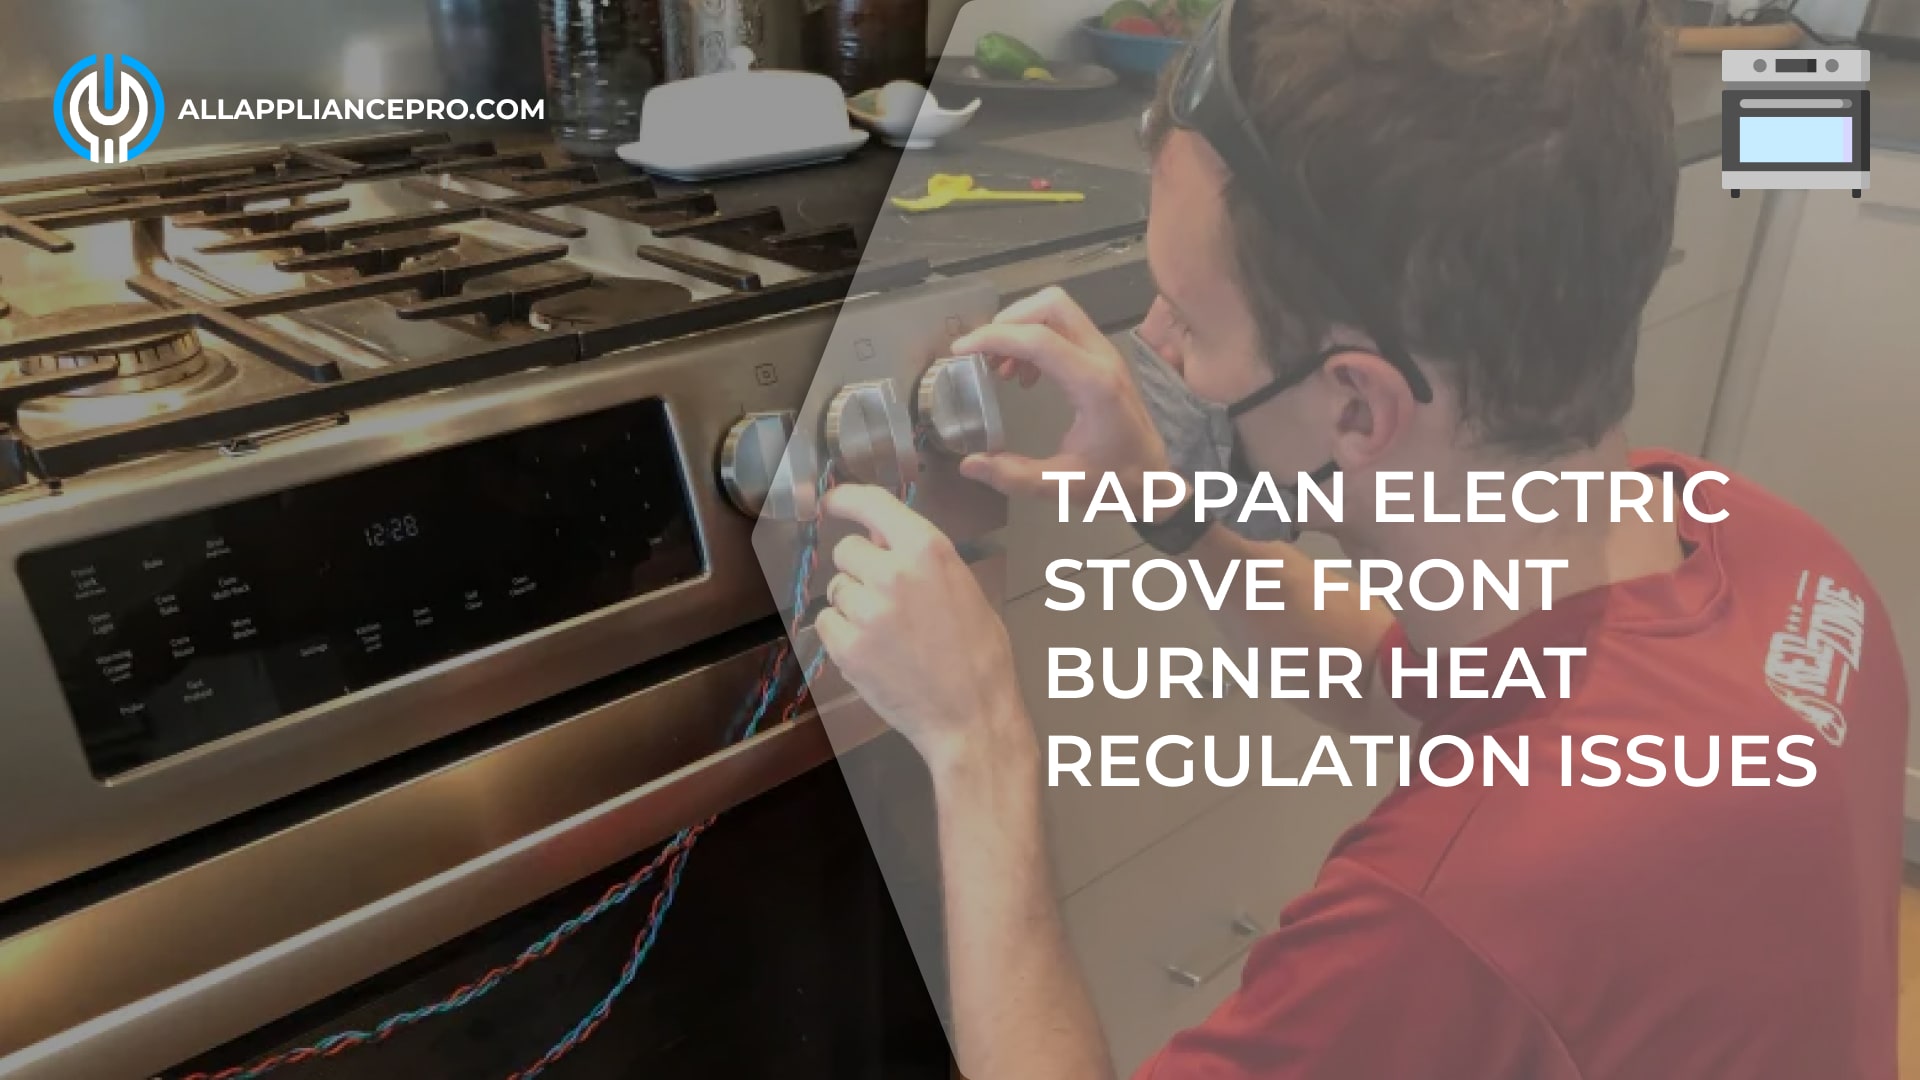 Tappan Electric Stove Front Burner Heat Regulation Issues